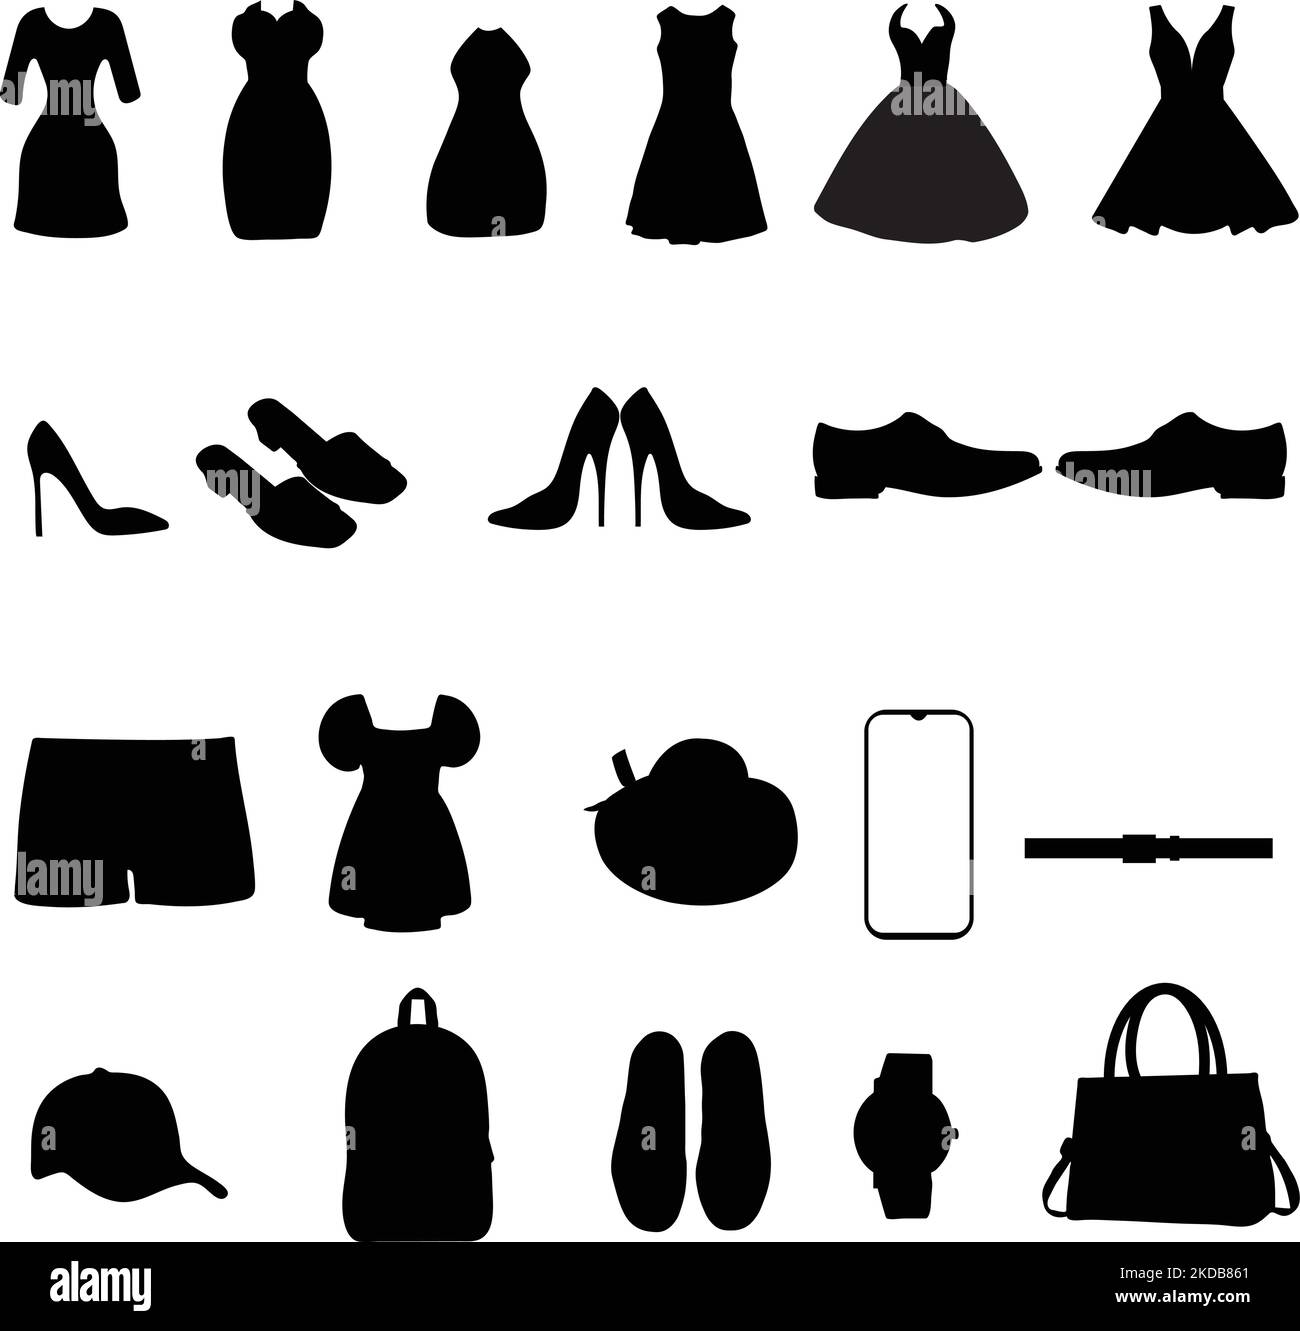 The dresses, shoes and accessories vector illustration against the white background Stock Vector